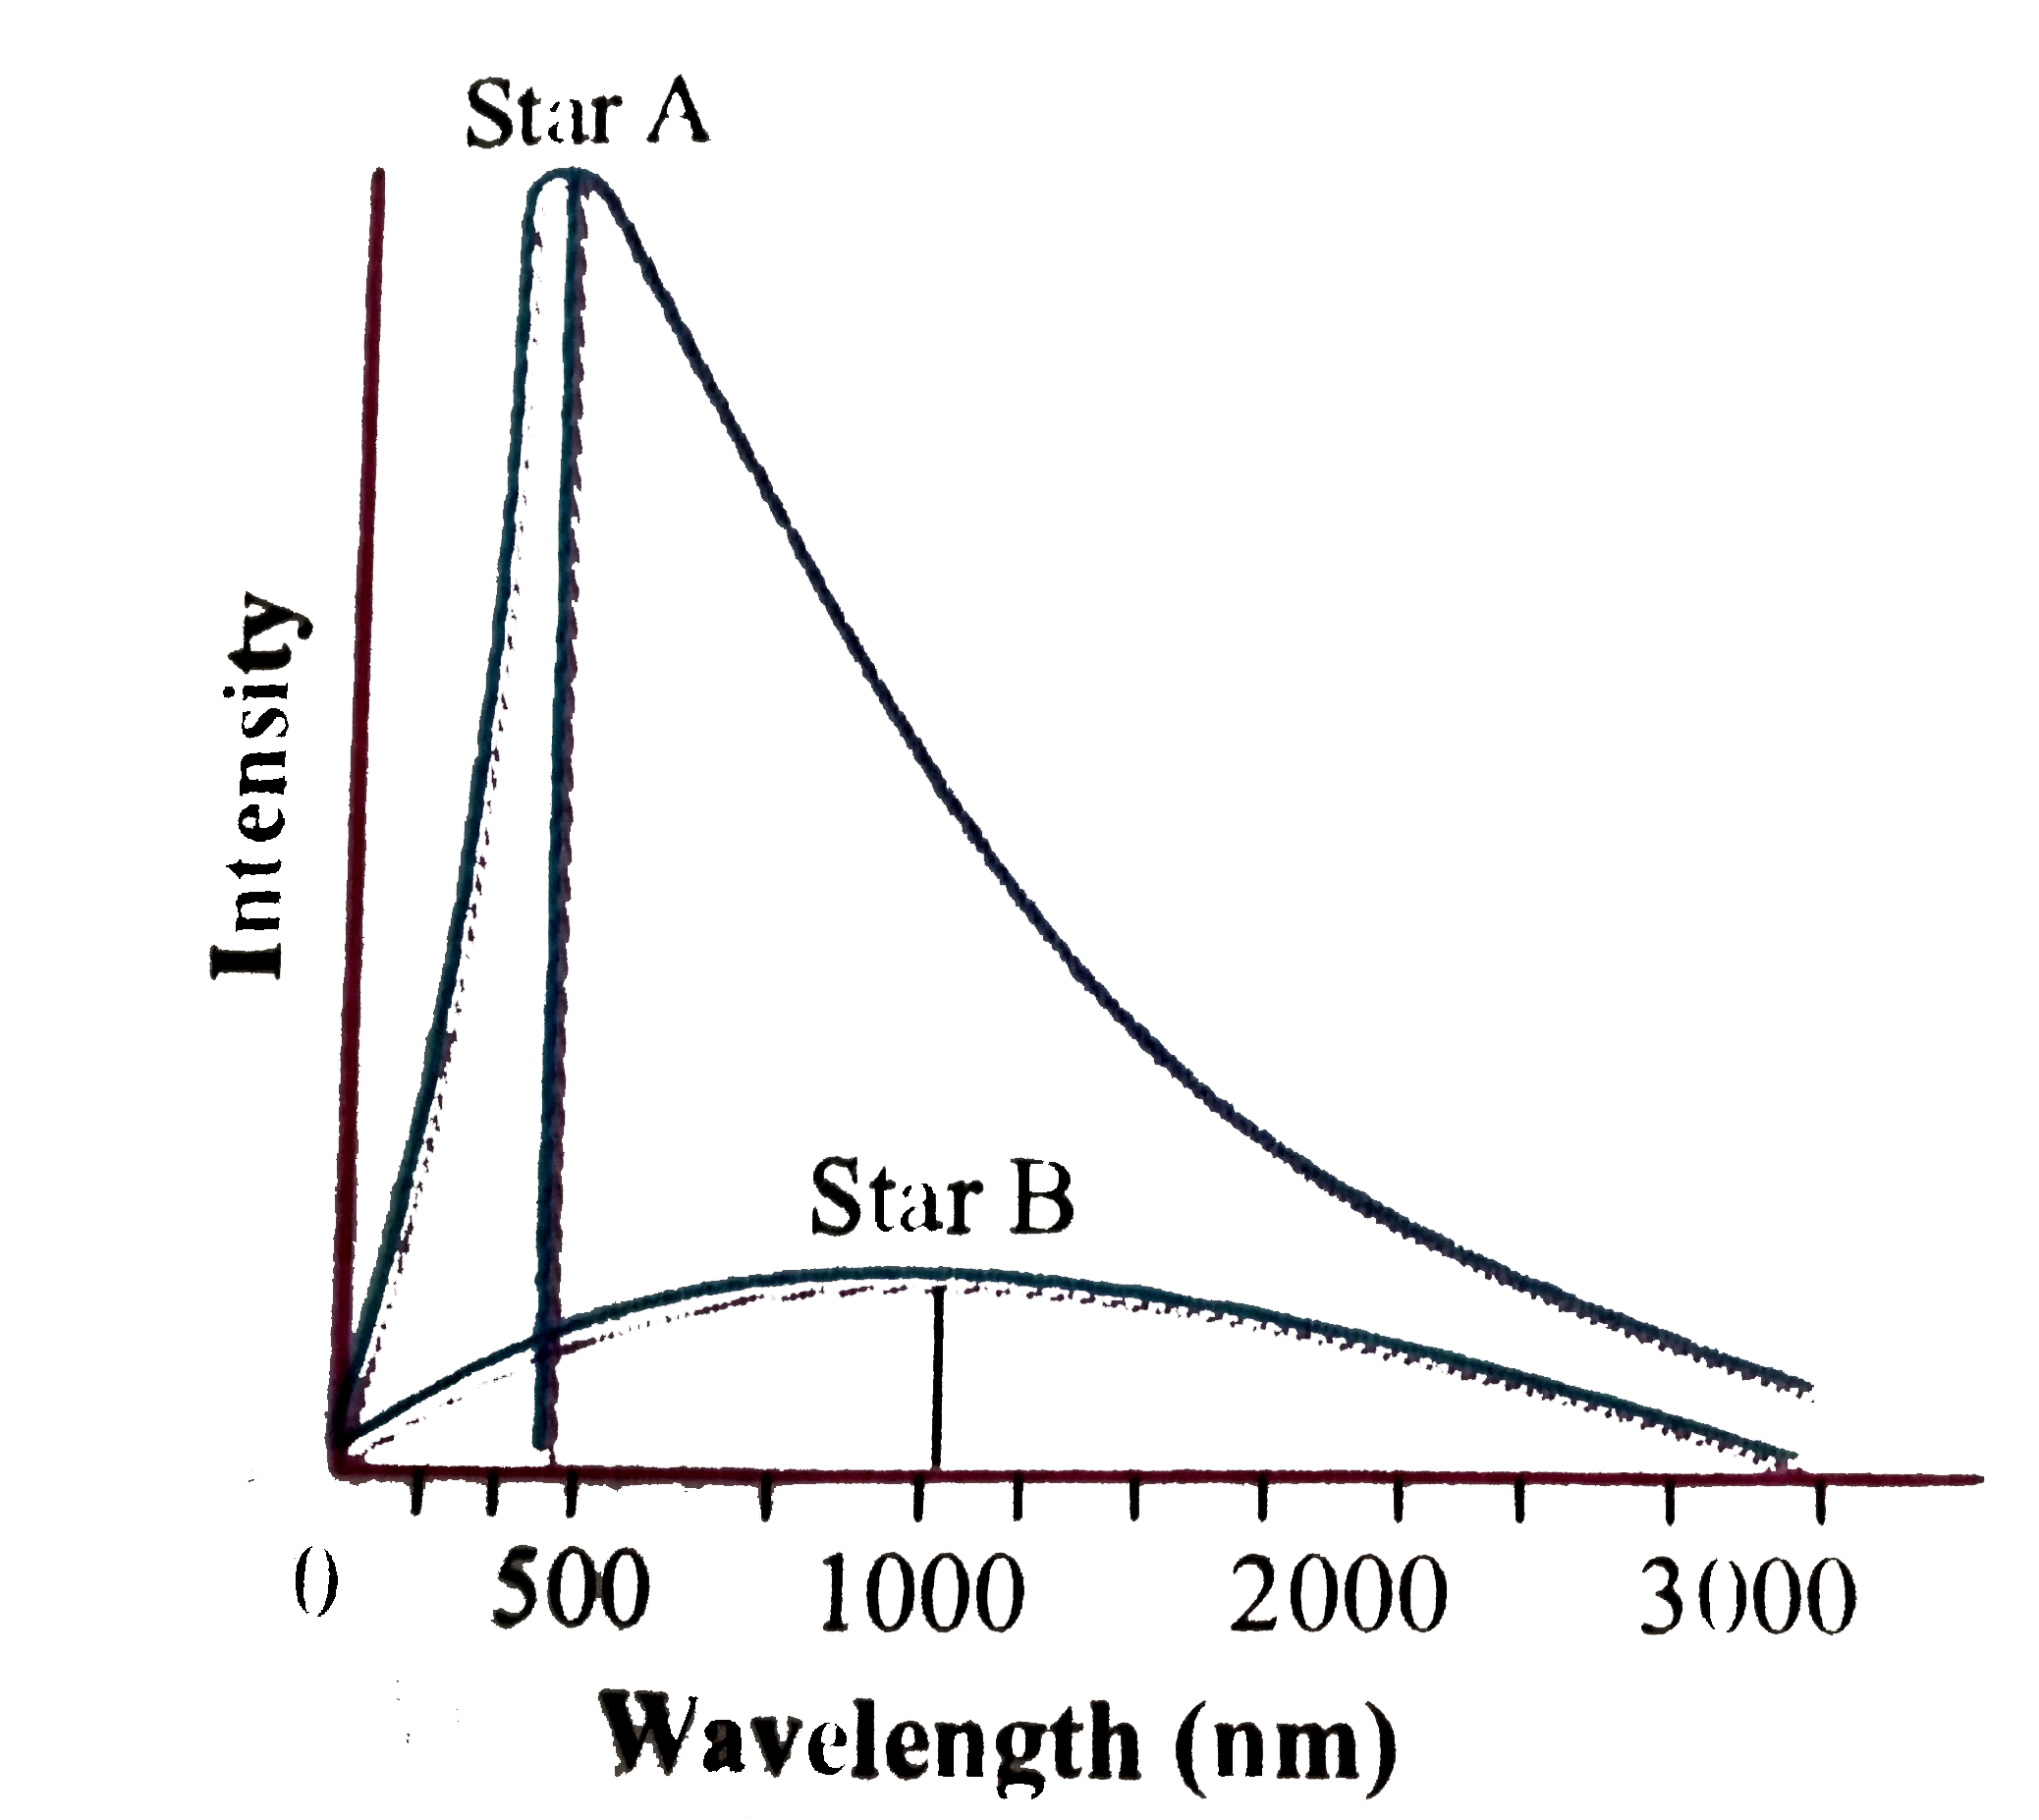 The spectra of radiation emitted by two distant stars are shown below The ratio of the surface temperature of star A to that of star B, T(A) :T(B) is approximately    .